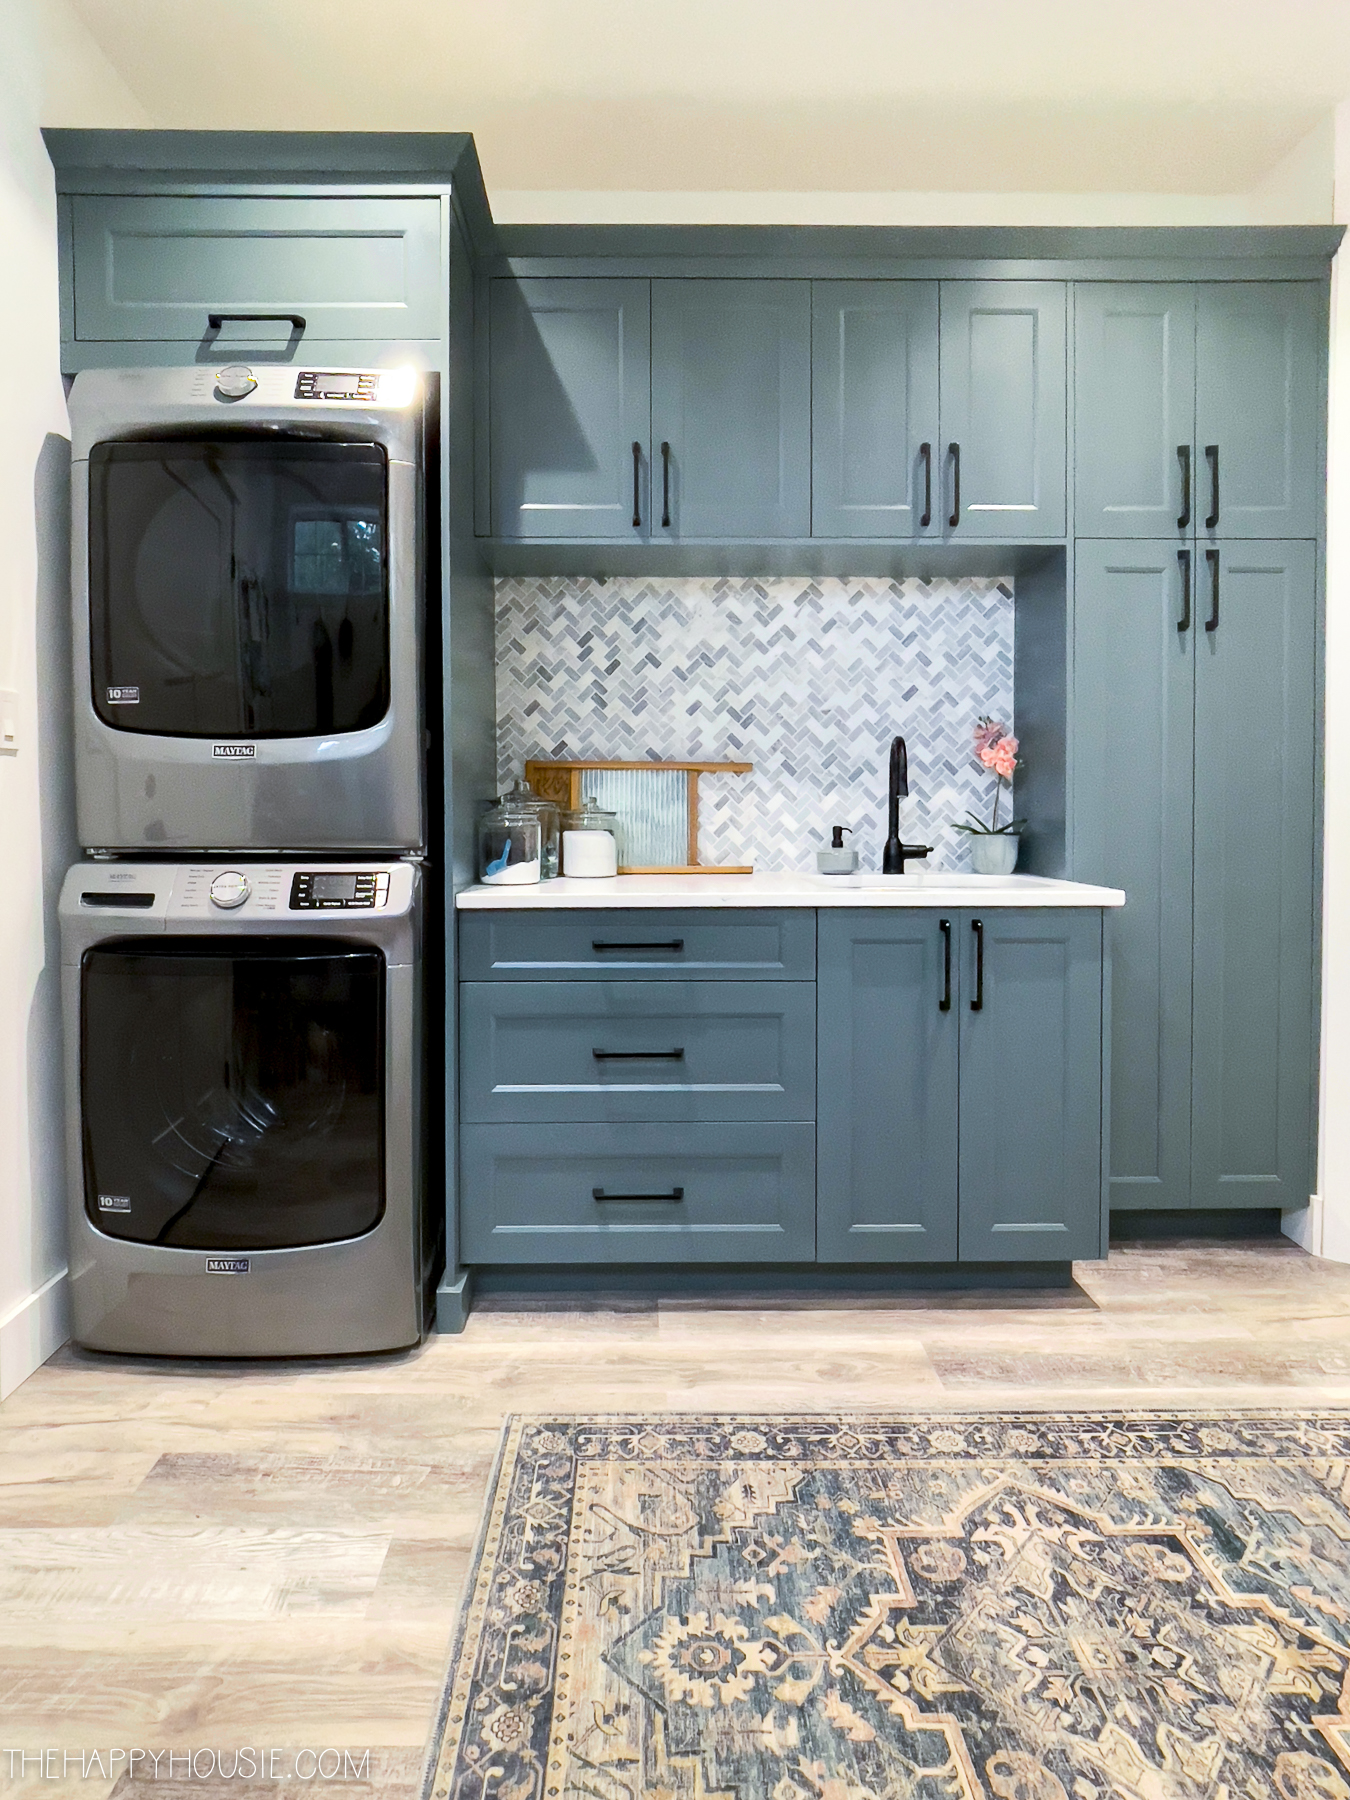 A laundry room with blue/grey cupboards and a modern washer and dryer.